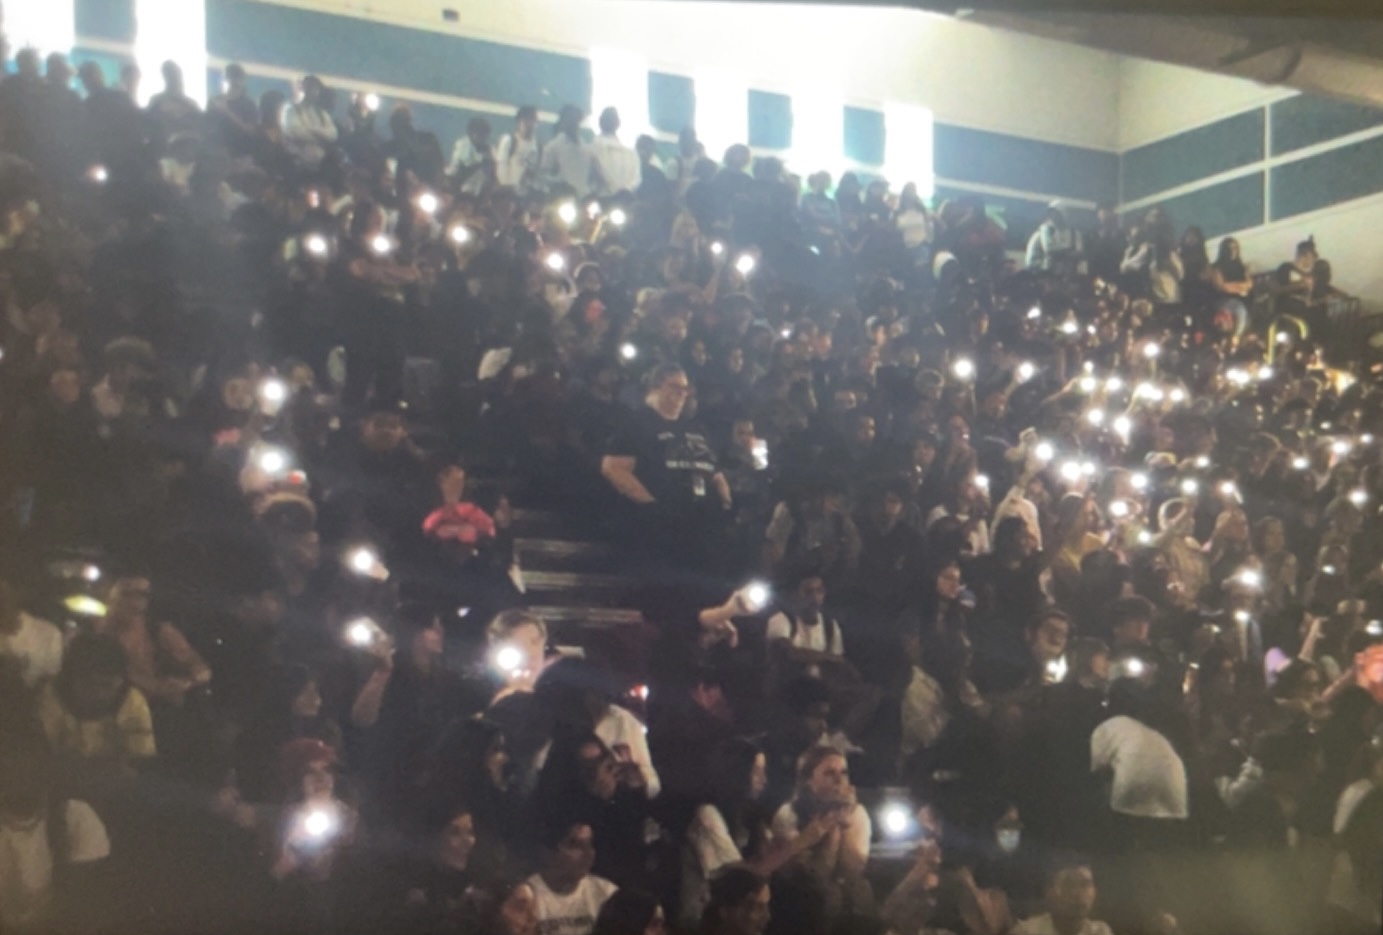 The student section of the assembly flashing their lights in accordance to Tales As Old As Time